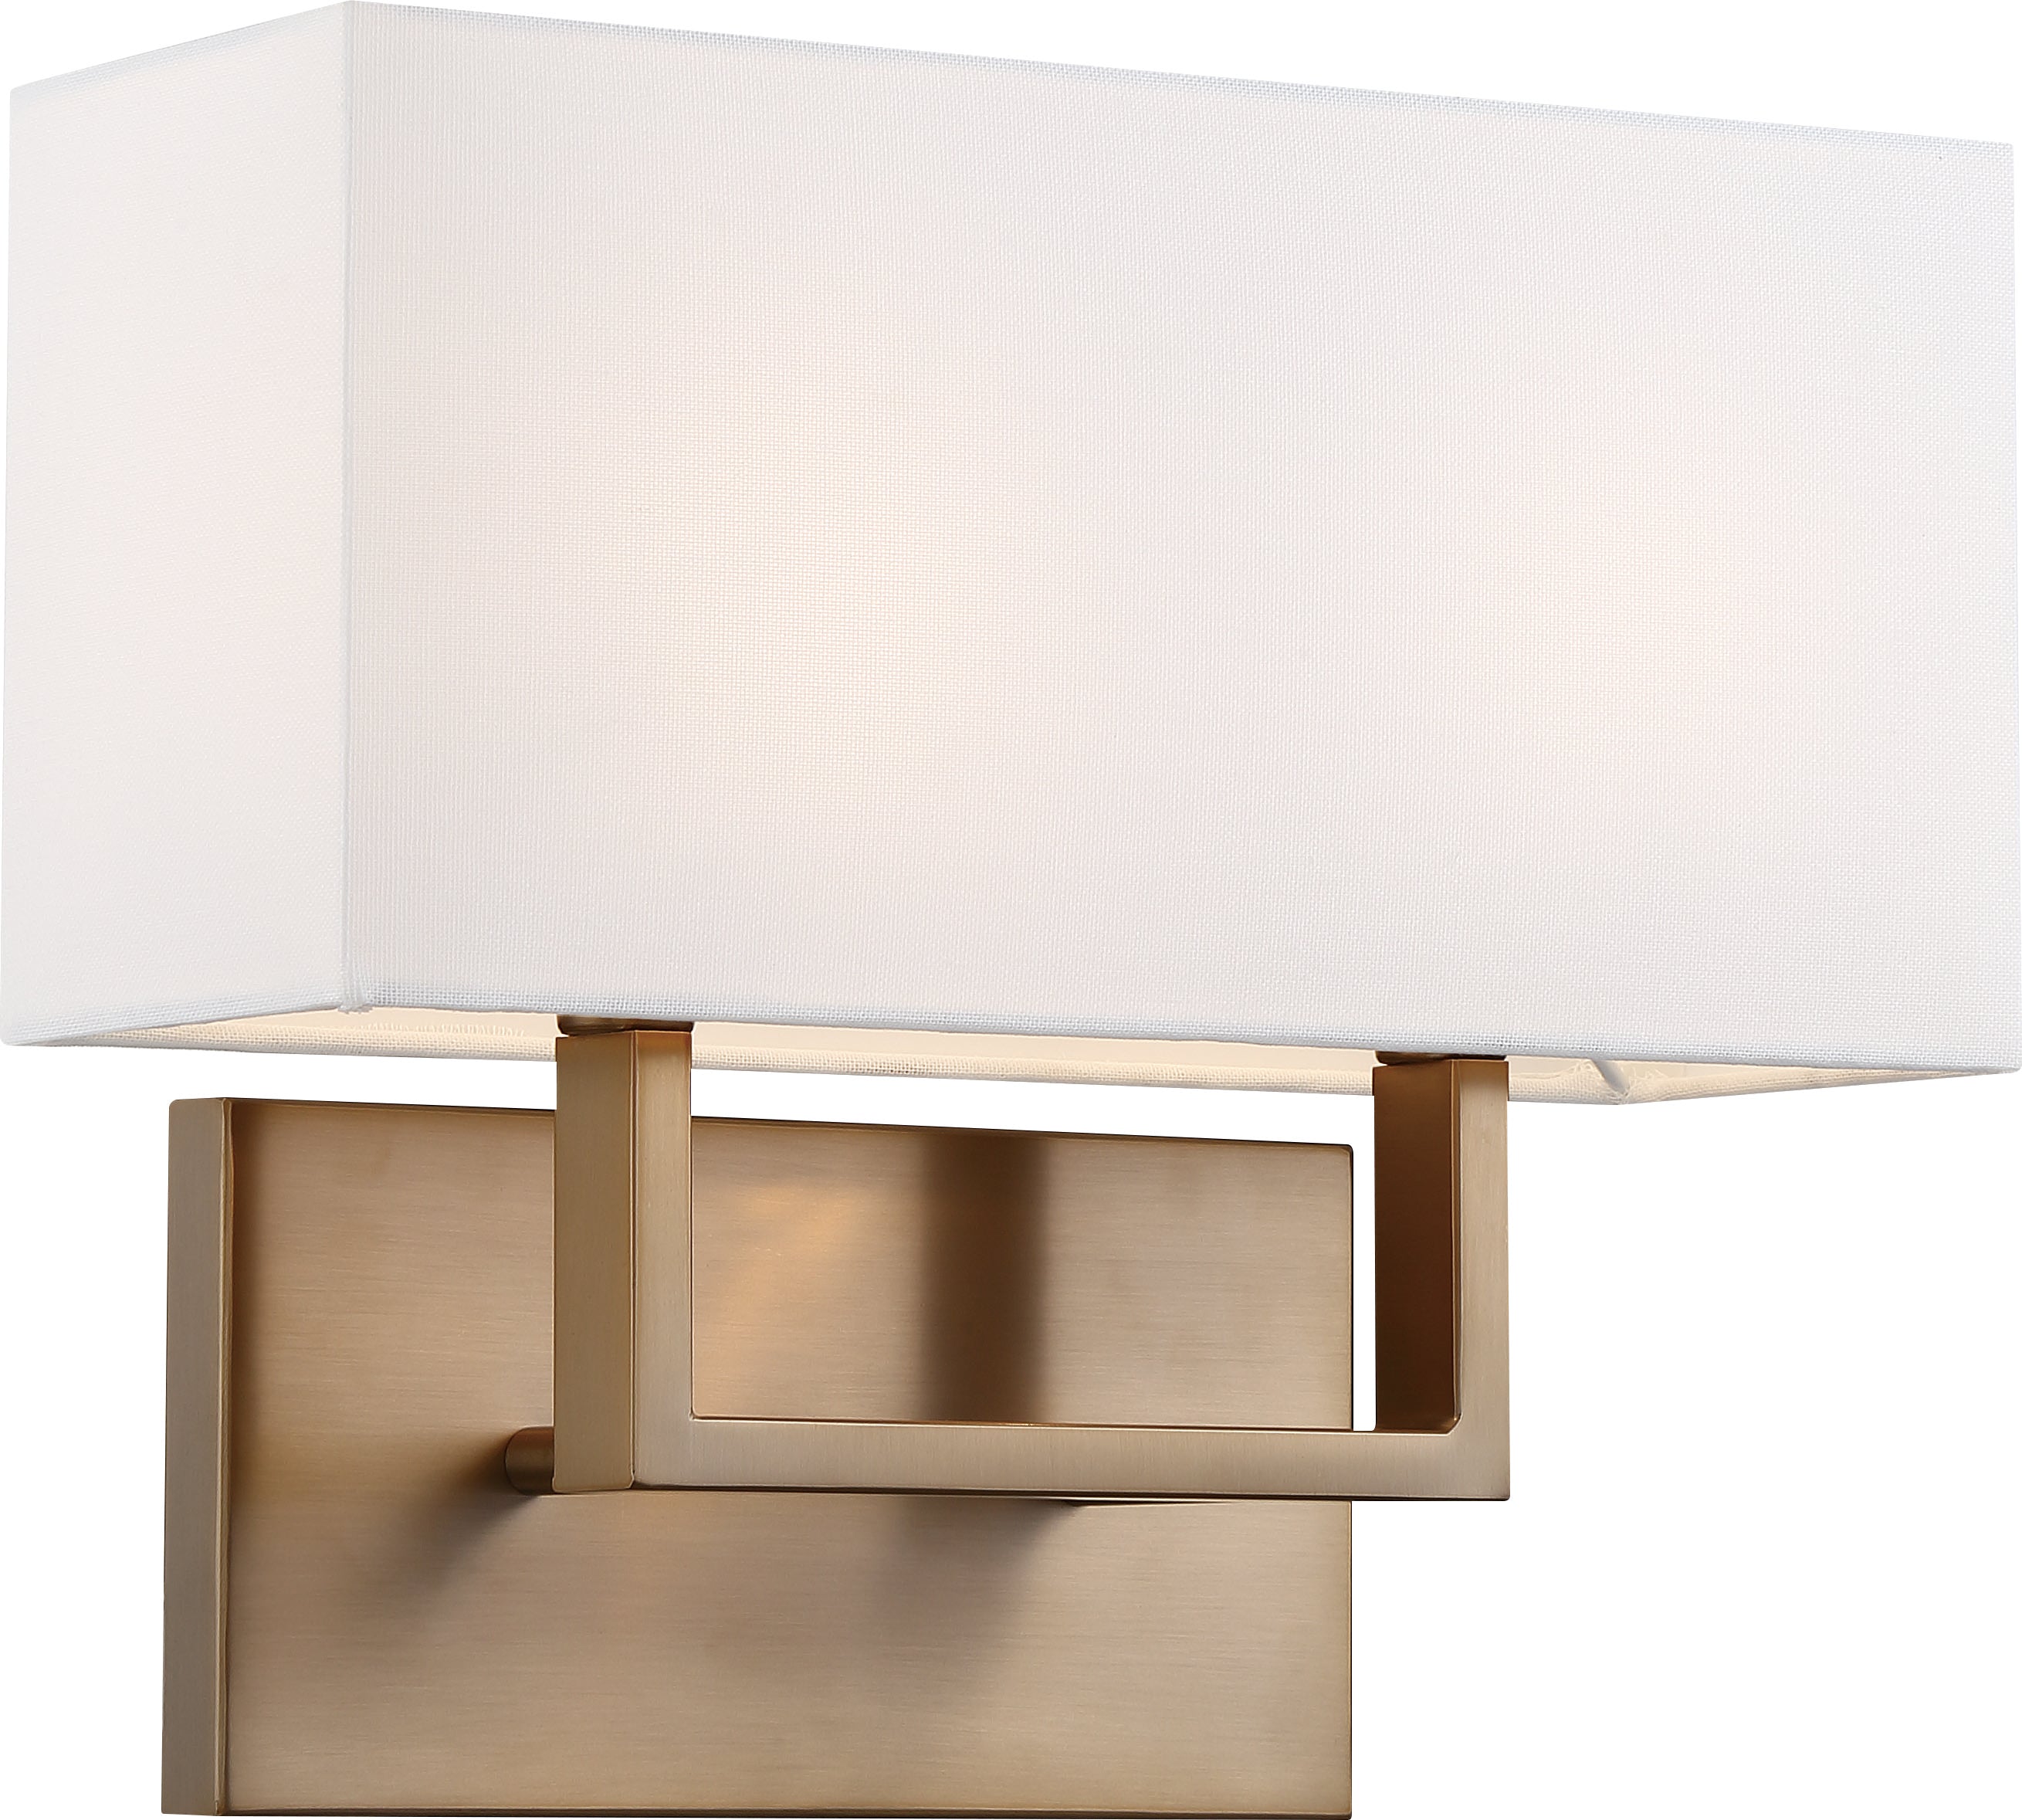 Tribeca 2 Light Bath Vanity Fixture - Burnished Brass with White Linen Shade